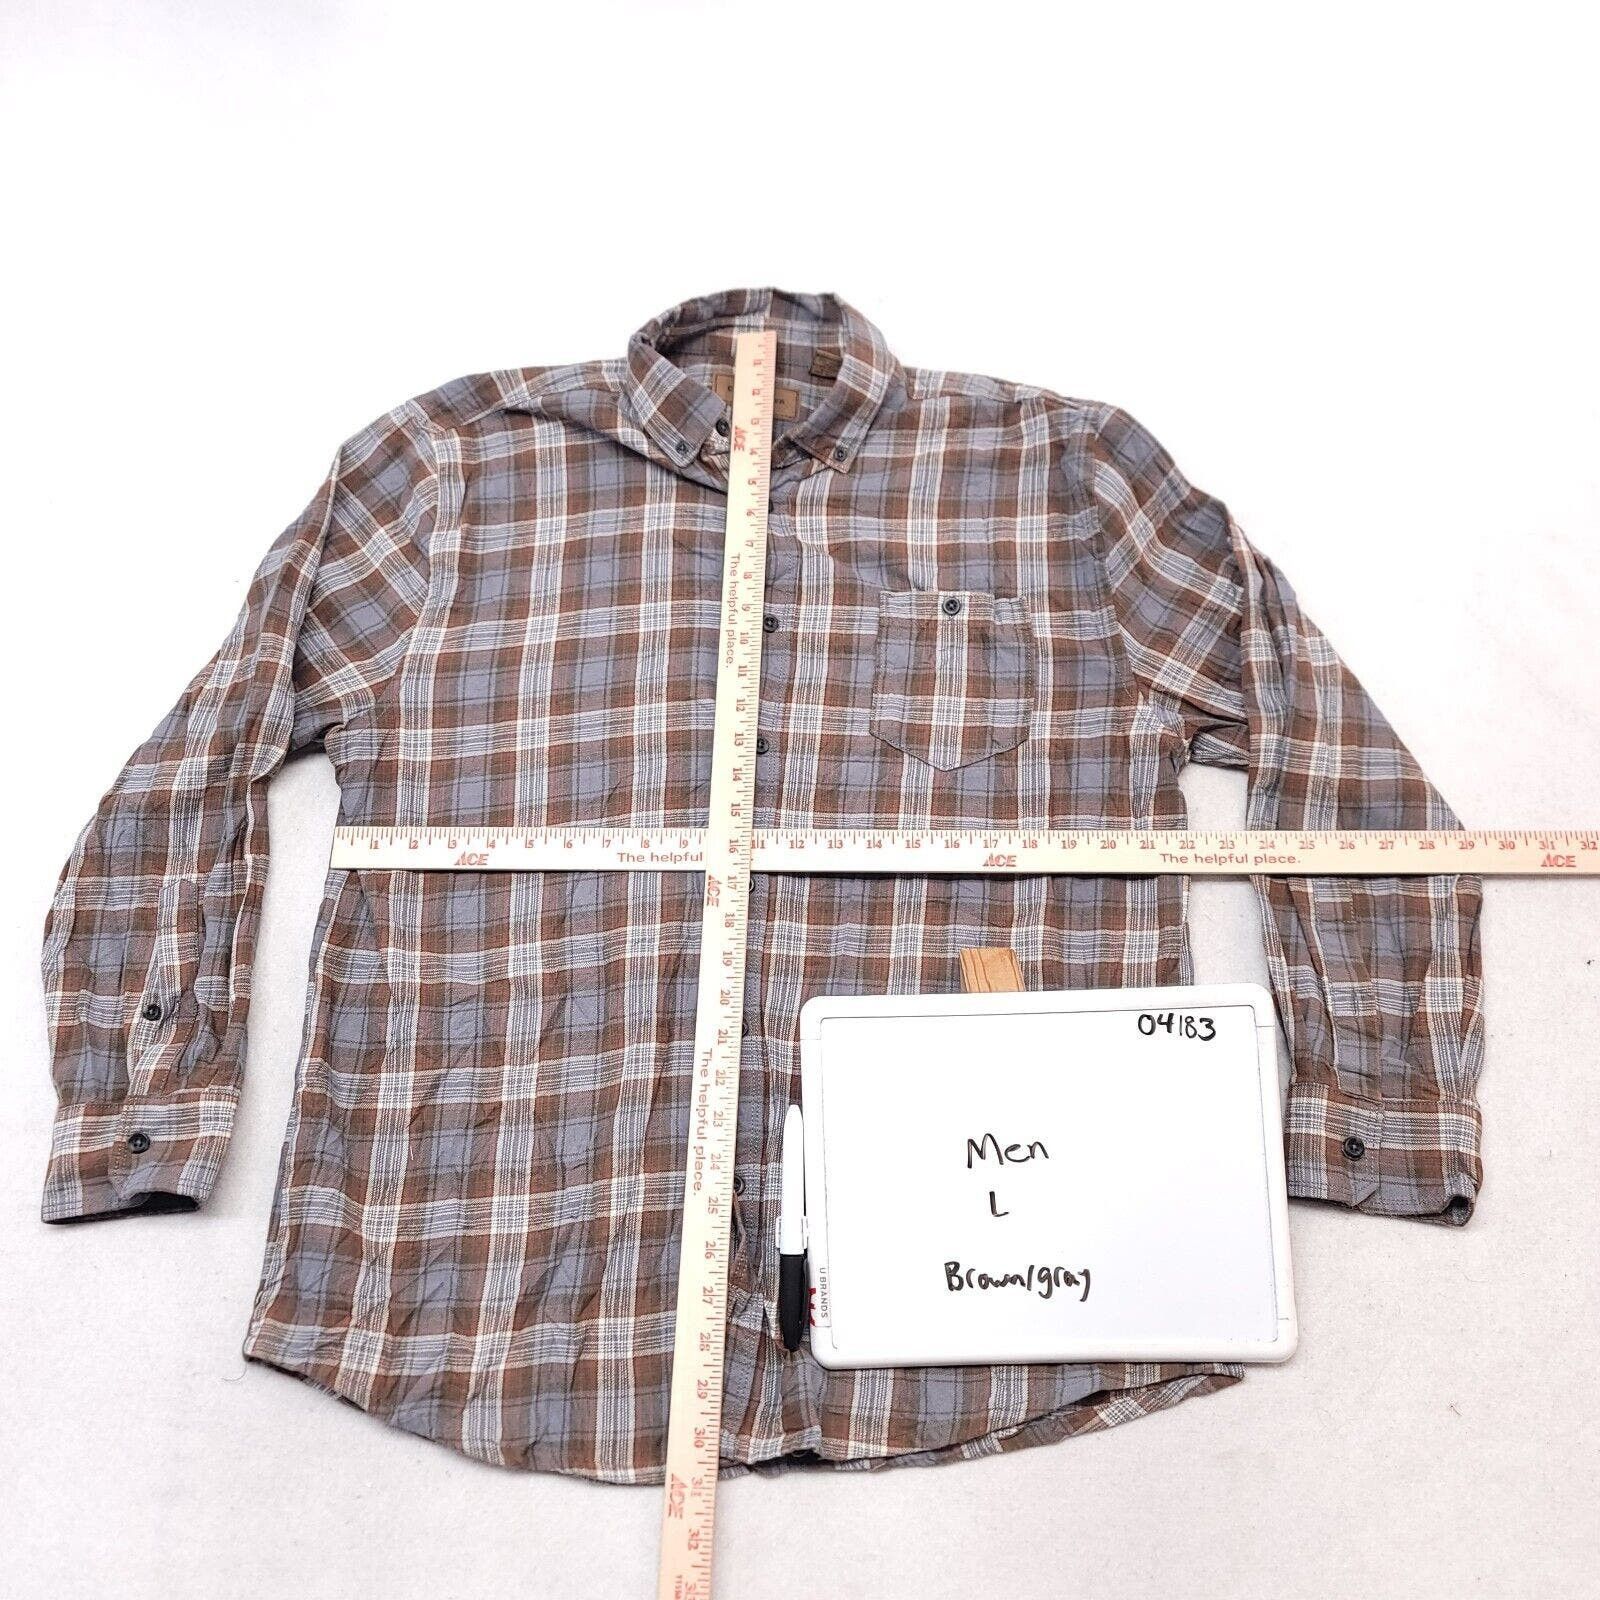 Clearwater Outfitters Clearwater Outfitters Tartan Flannel Shirt Mens Size L Brown Size US L / EU 52-54 / 3 - 6 Thumbnail